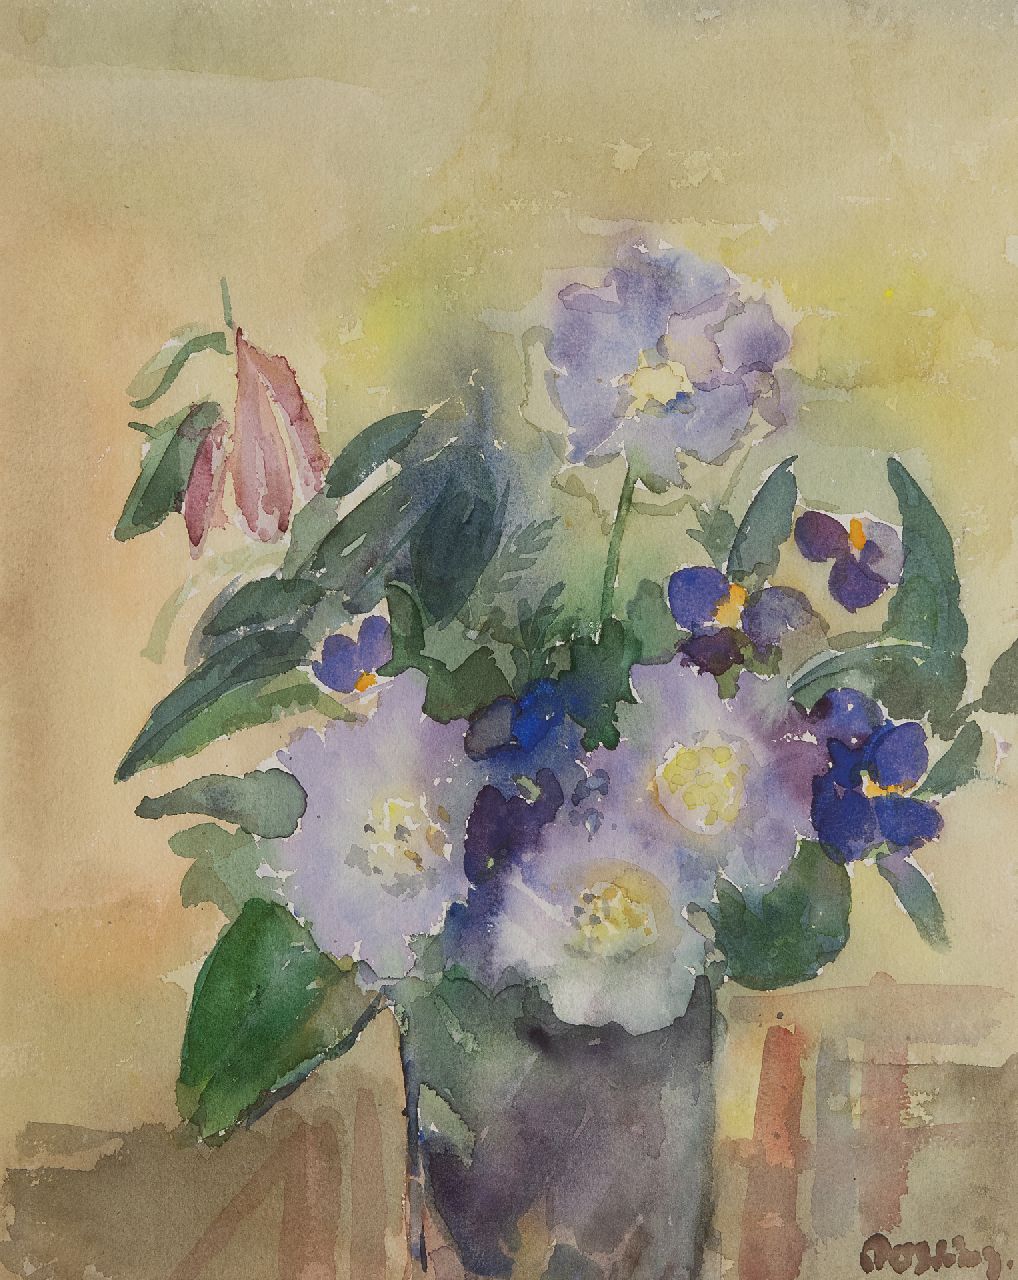 Bieruma Oosting A.J.W.  | Adriana Johanna Wilhelmina 'Jeanne' Bieruma Oosting | Watercolours and drawings offered for sale | Flower still life, watercolour on paper 41.5 x 33.5 cm, signed l.r.